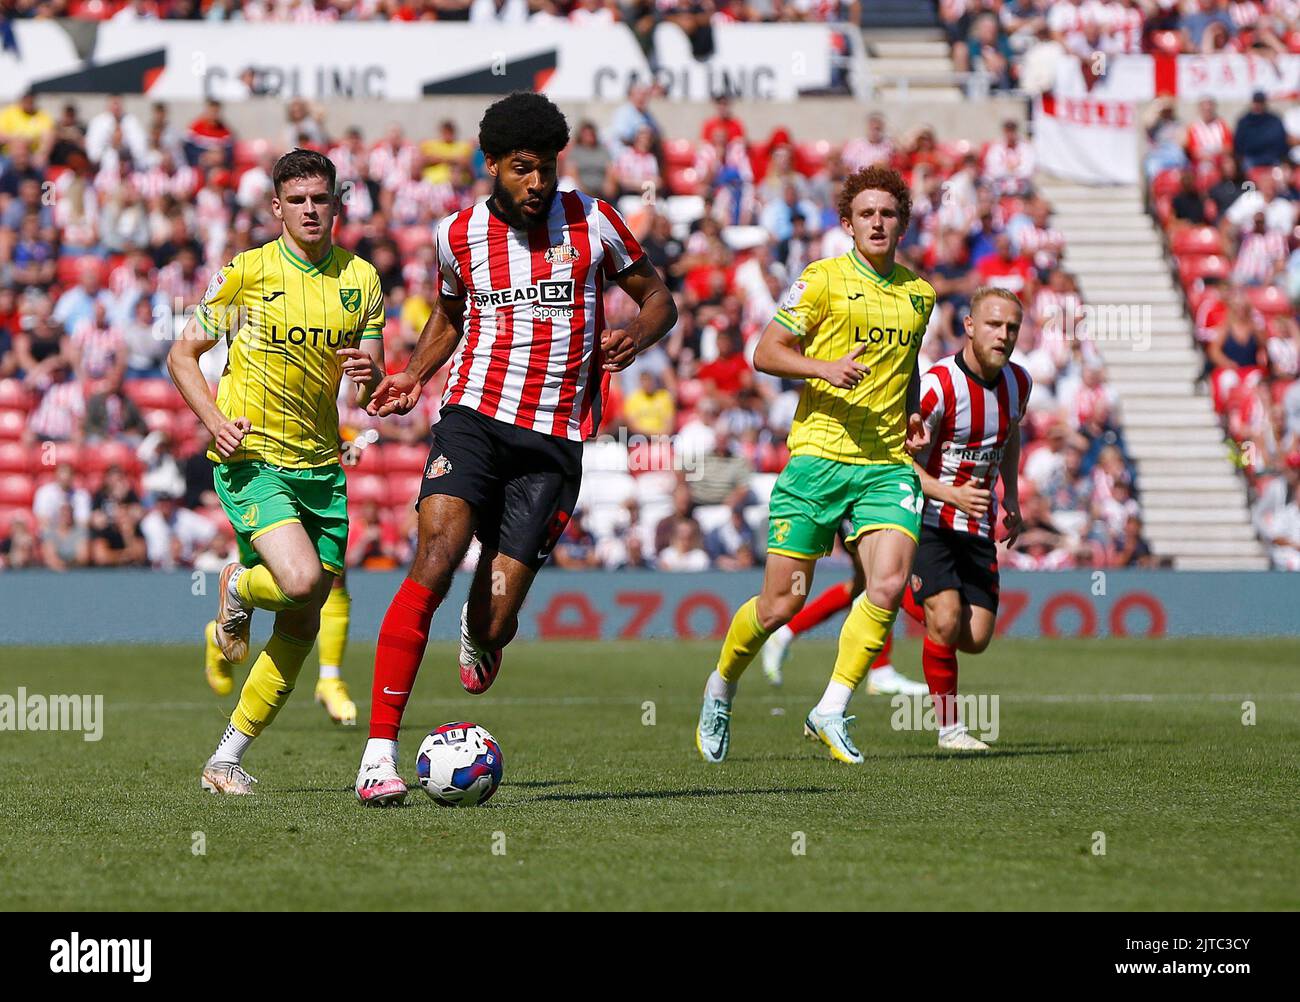 Sunderland, UK. 27th Aug, 2022. Ellis Simms of Sunderland runs with the ball during the Sky Bet Championship match between Sunderland and Norwich City at Stadium of Light on August 27th 2022 in Sunderland, England. (Photo by Mick Kearns/phcimages.com) Credit: PHC Images/Alamy Live News Stock Photo